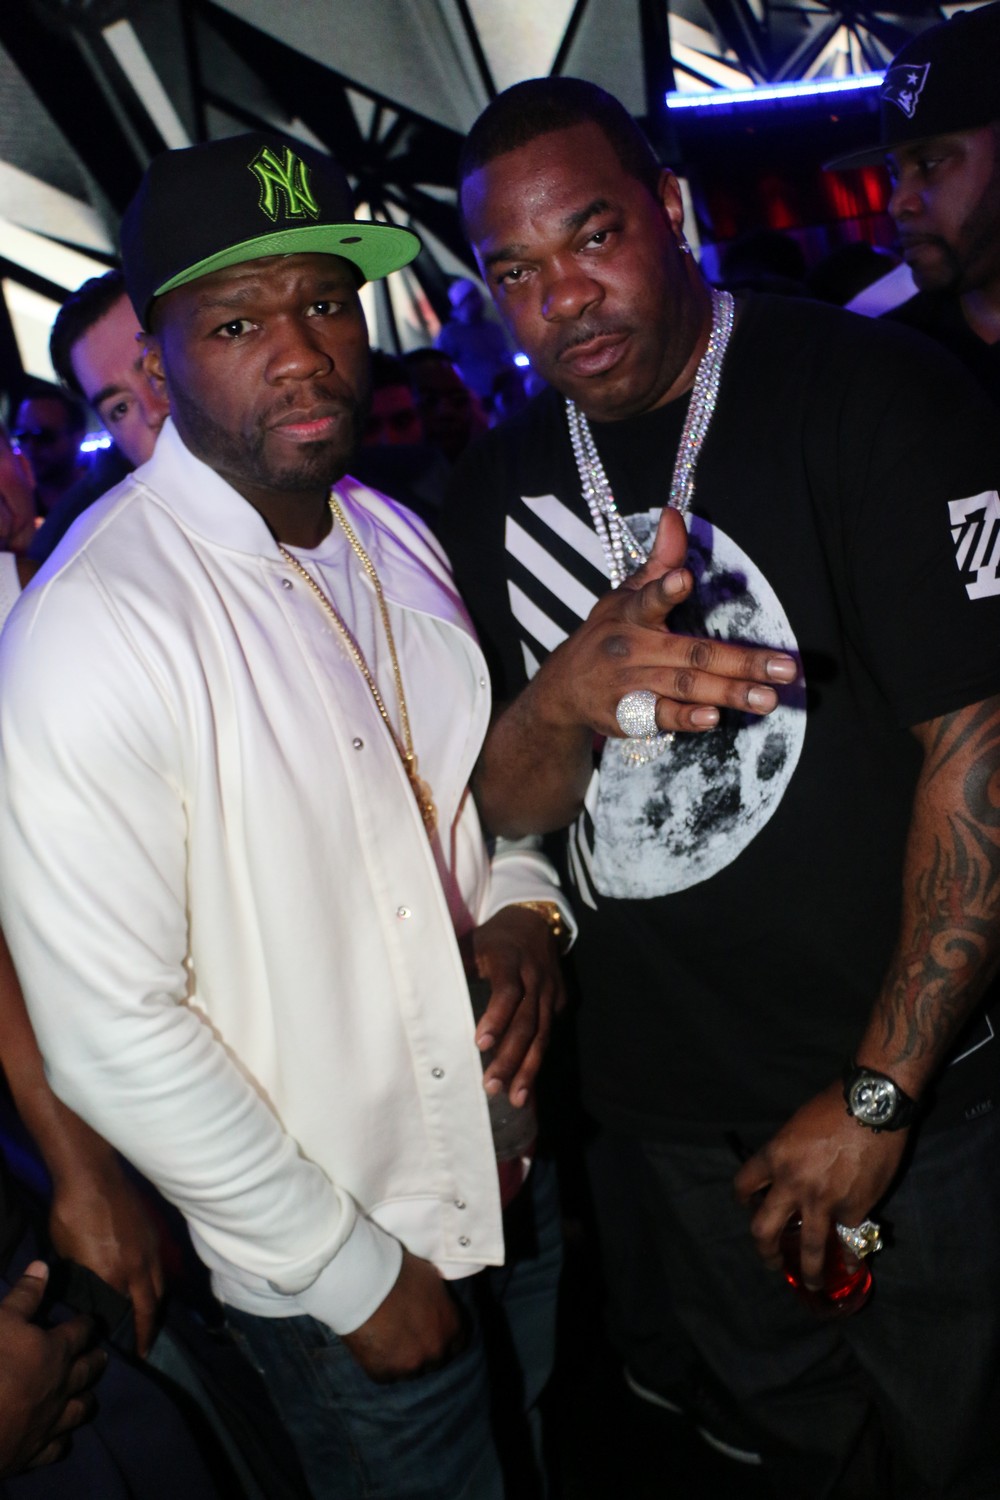 50 Cent and Busta Rhymes